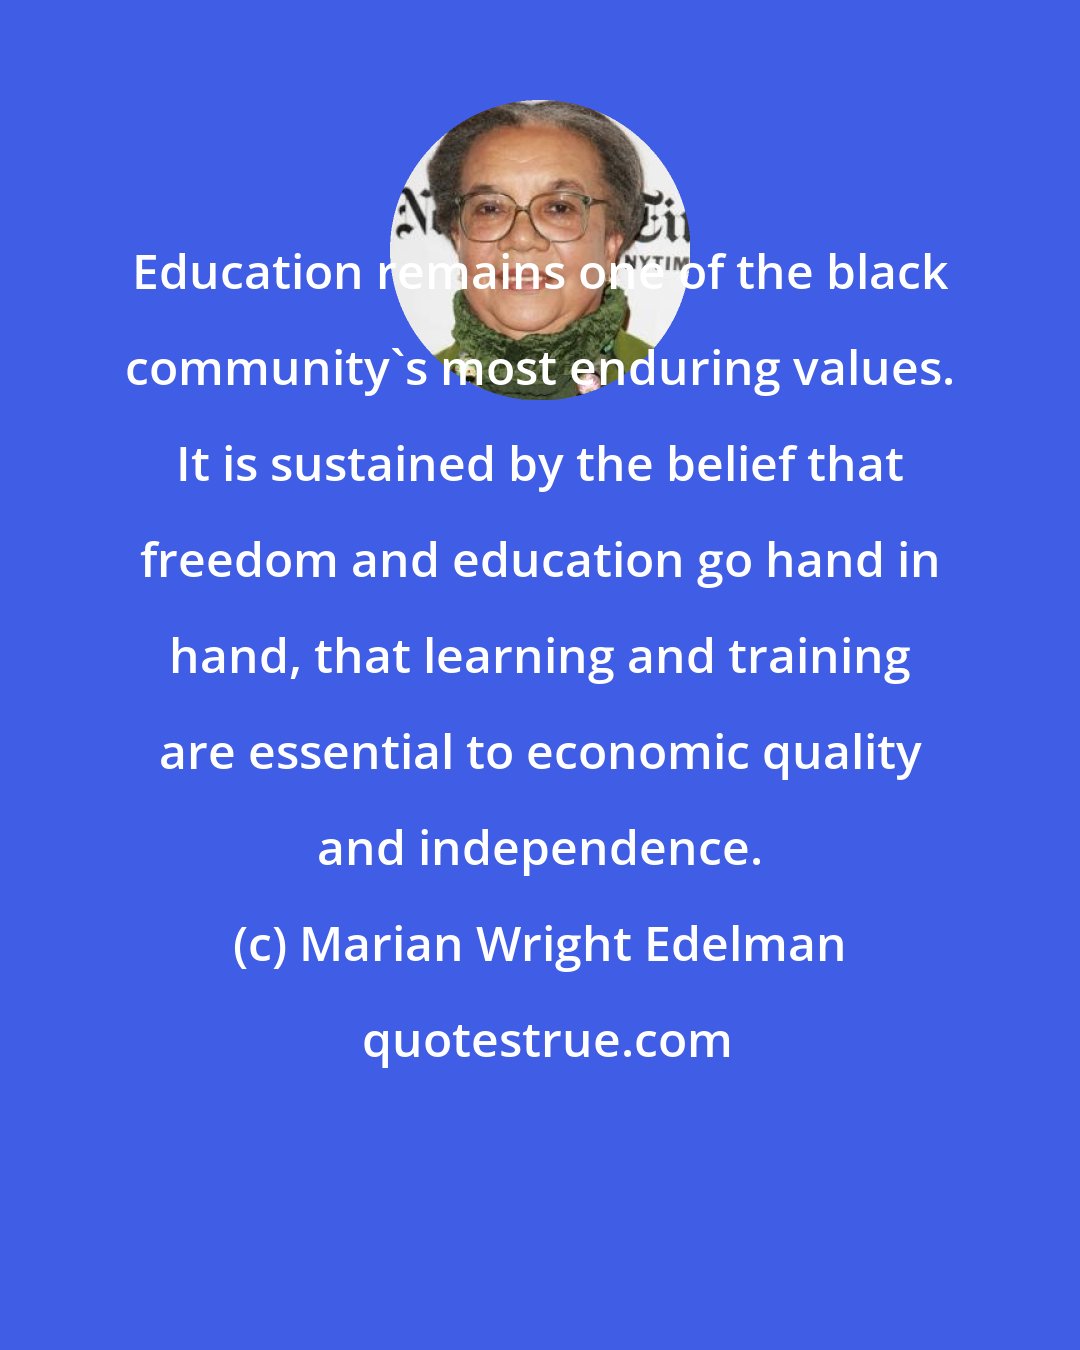 Marian Wright Edelman: Education remains one of the black community's most enduring values. It is sustained by the belief that freedom and education go hand in hand, that learning and training are essential to economic quality and independence.